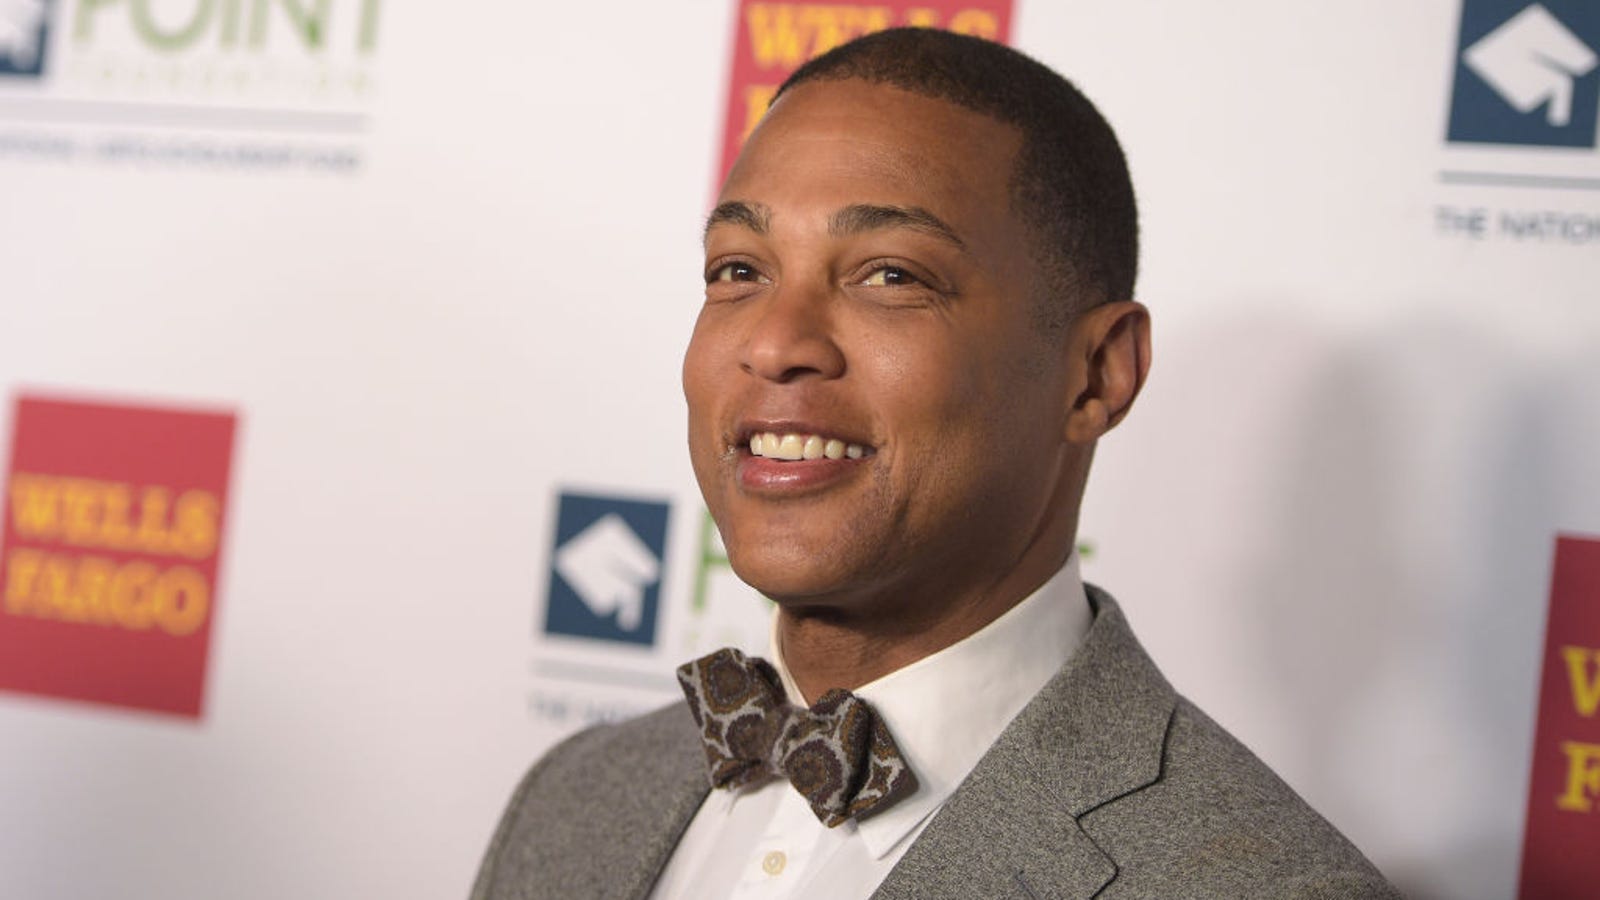 Don Lemon Helped Me Come Out to My Mother and It Changed My Life Forever